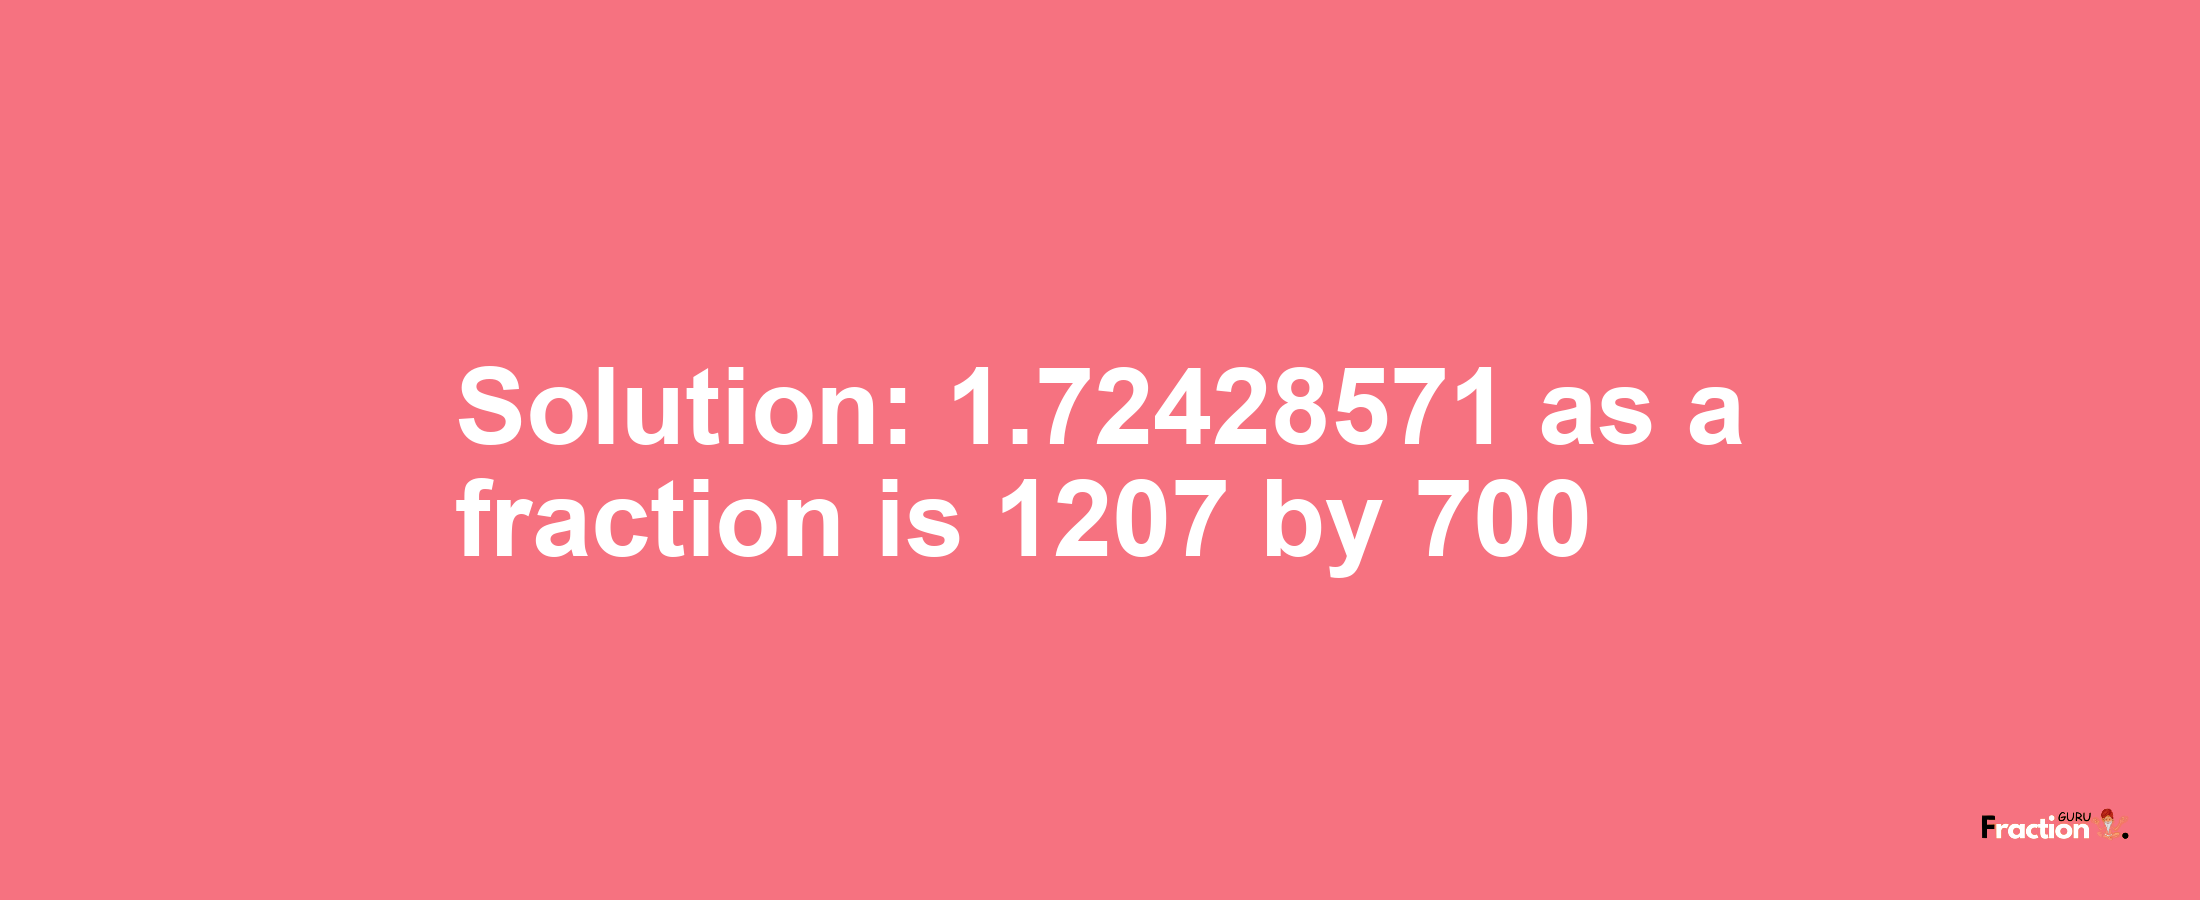 Solution:1.72428571 as a fraction is 1207/700